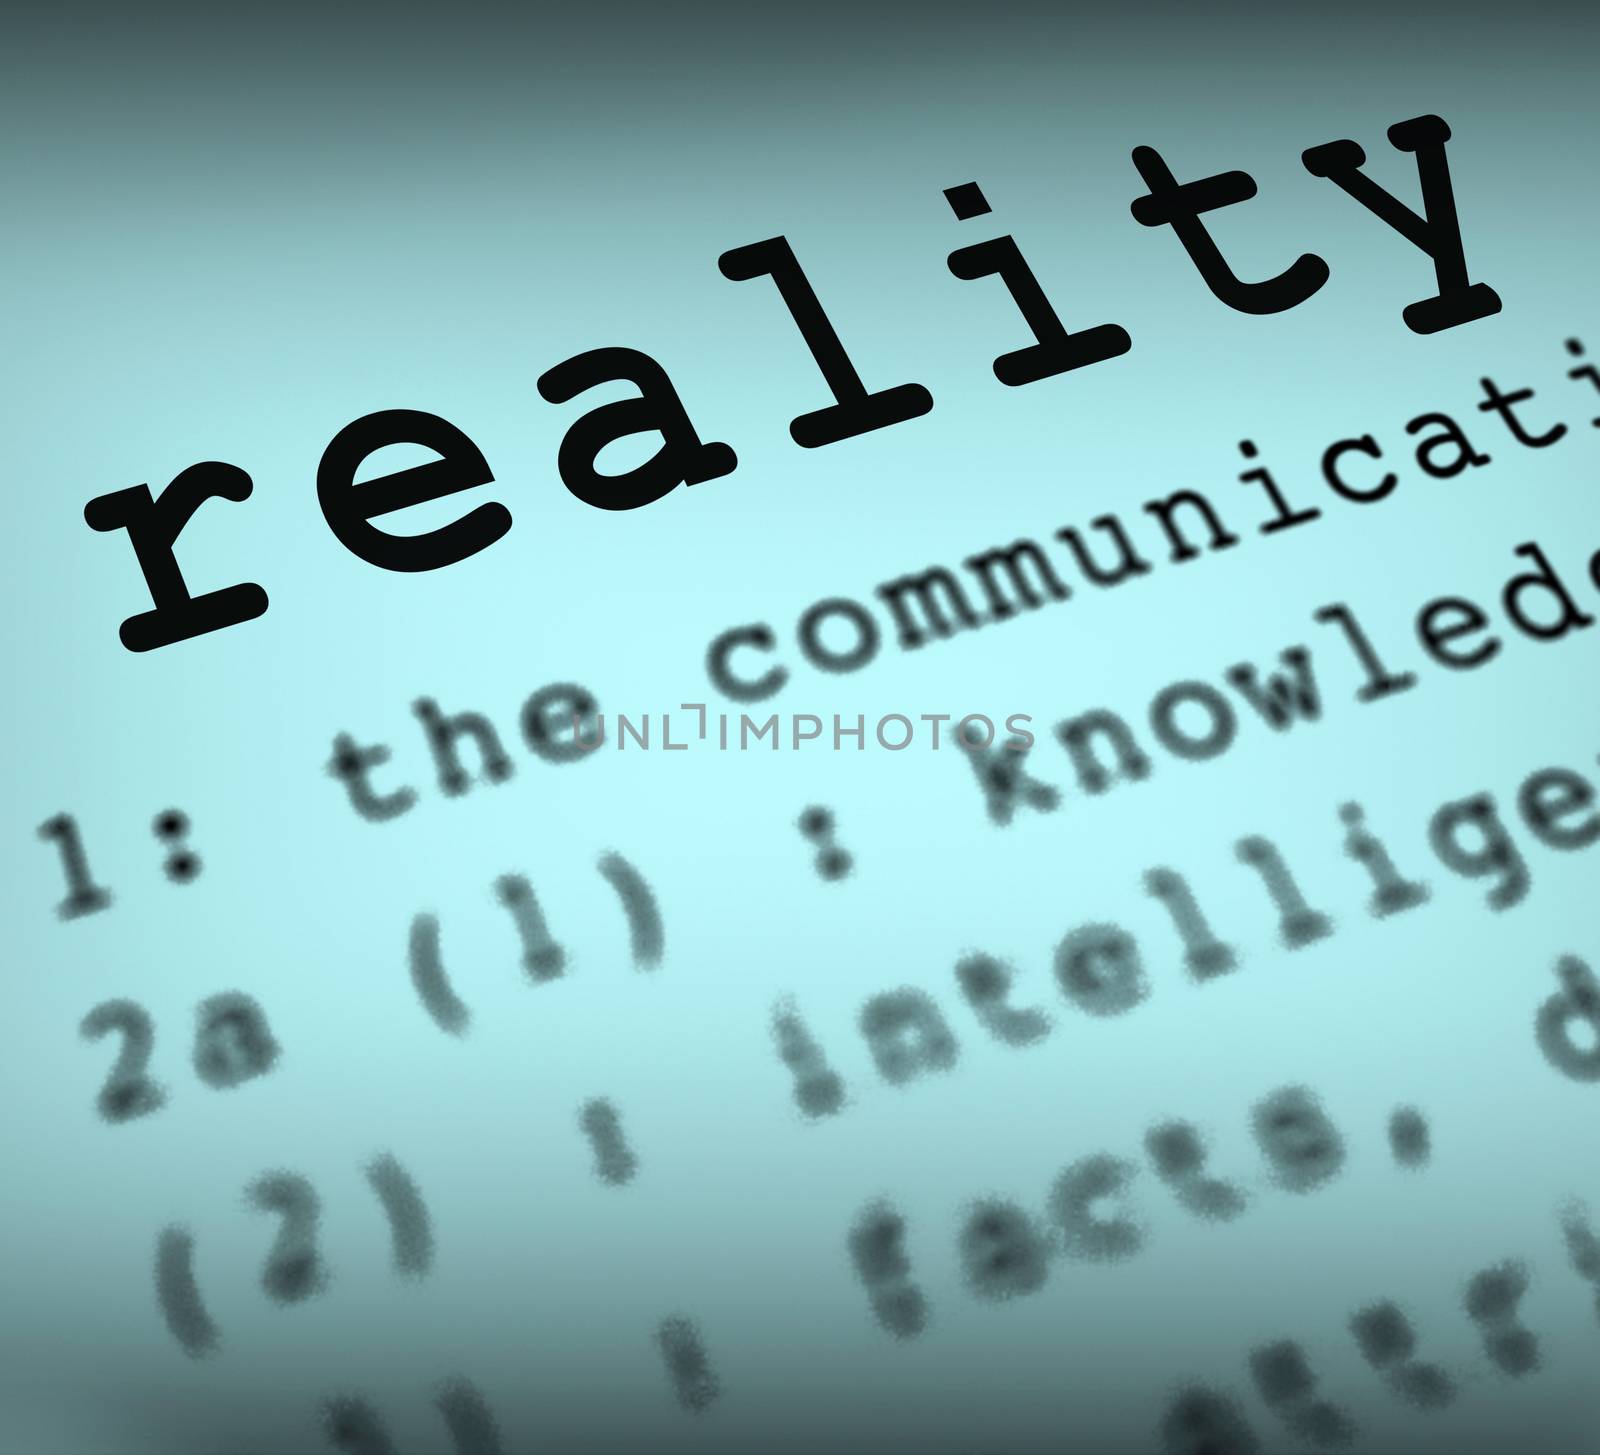 Reality Definition Shows Certainty And Facts by stuartmiles